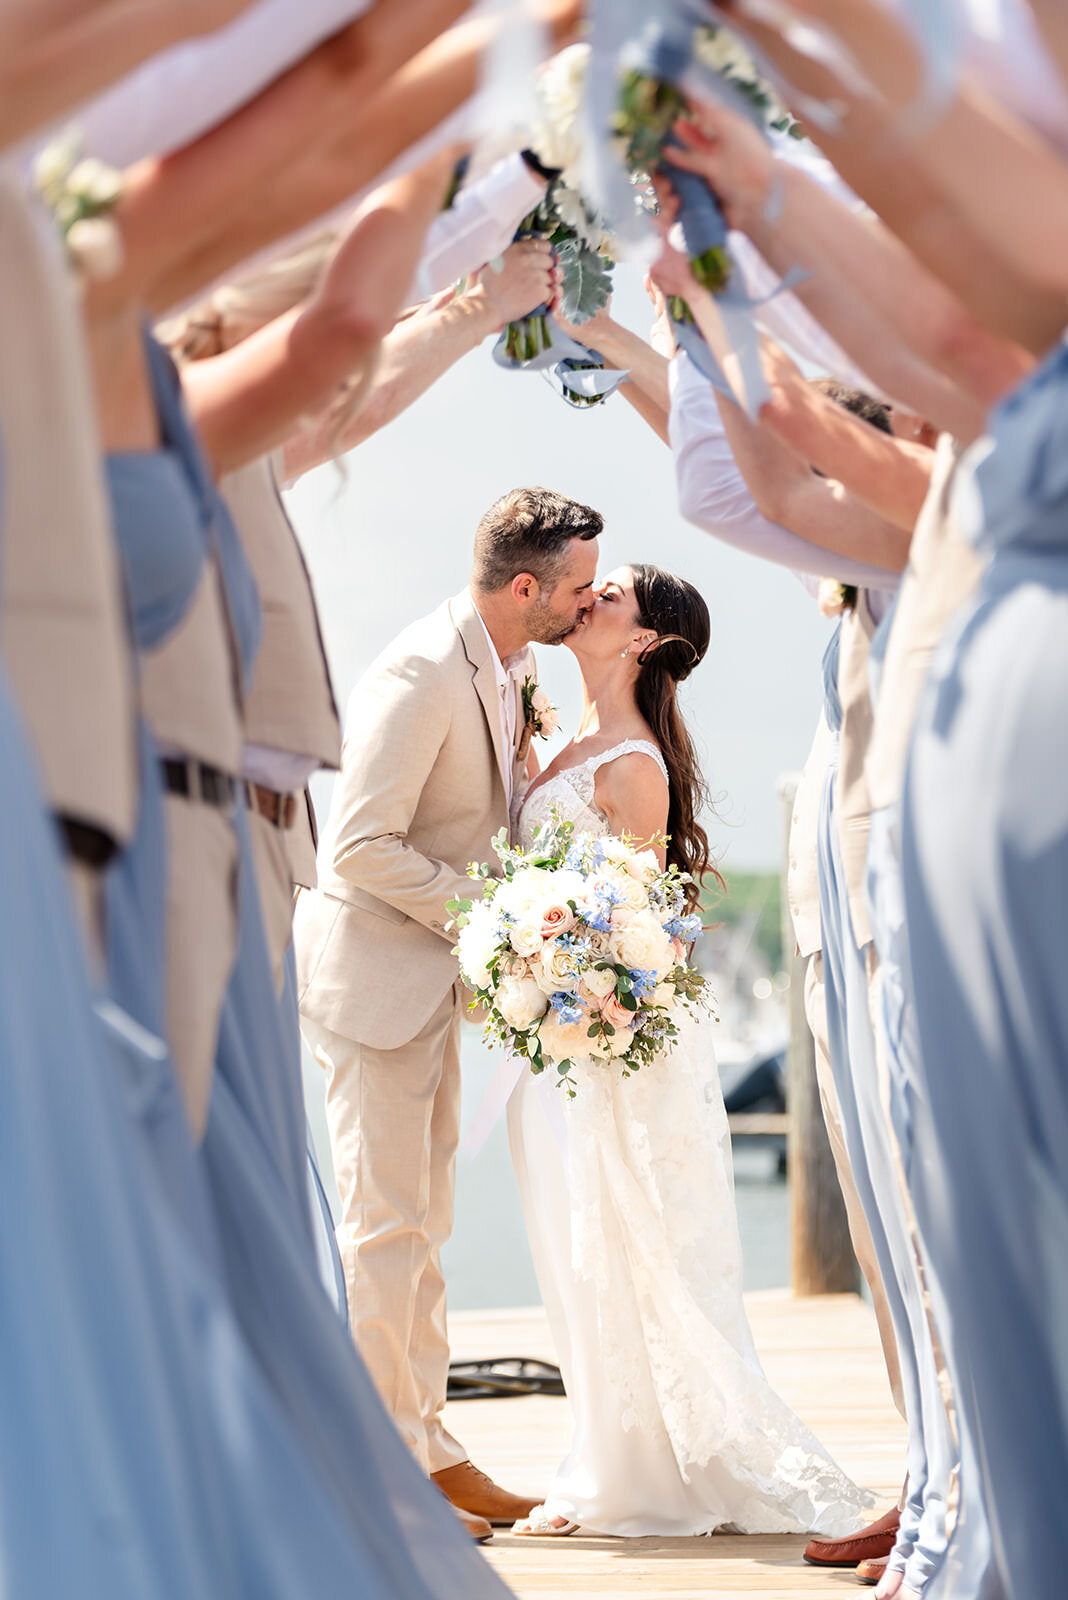 The bride and groom share a kiss under an archway made by the wedding party holding up bouquets, on a dock with a clear sky above.